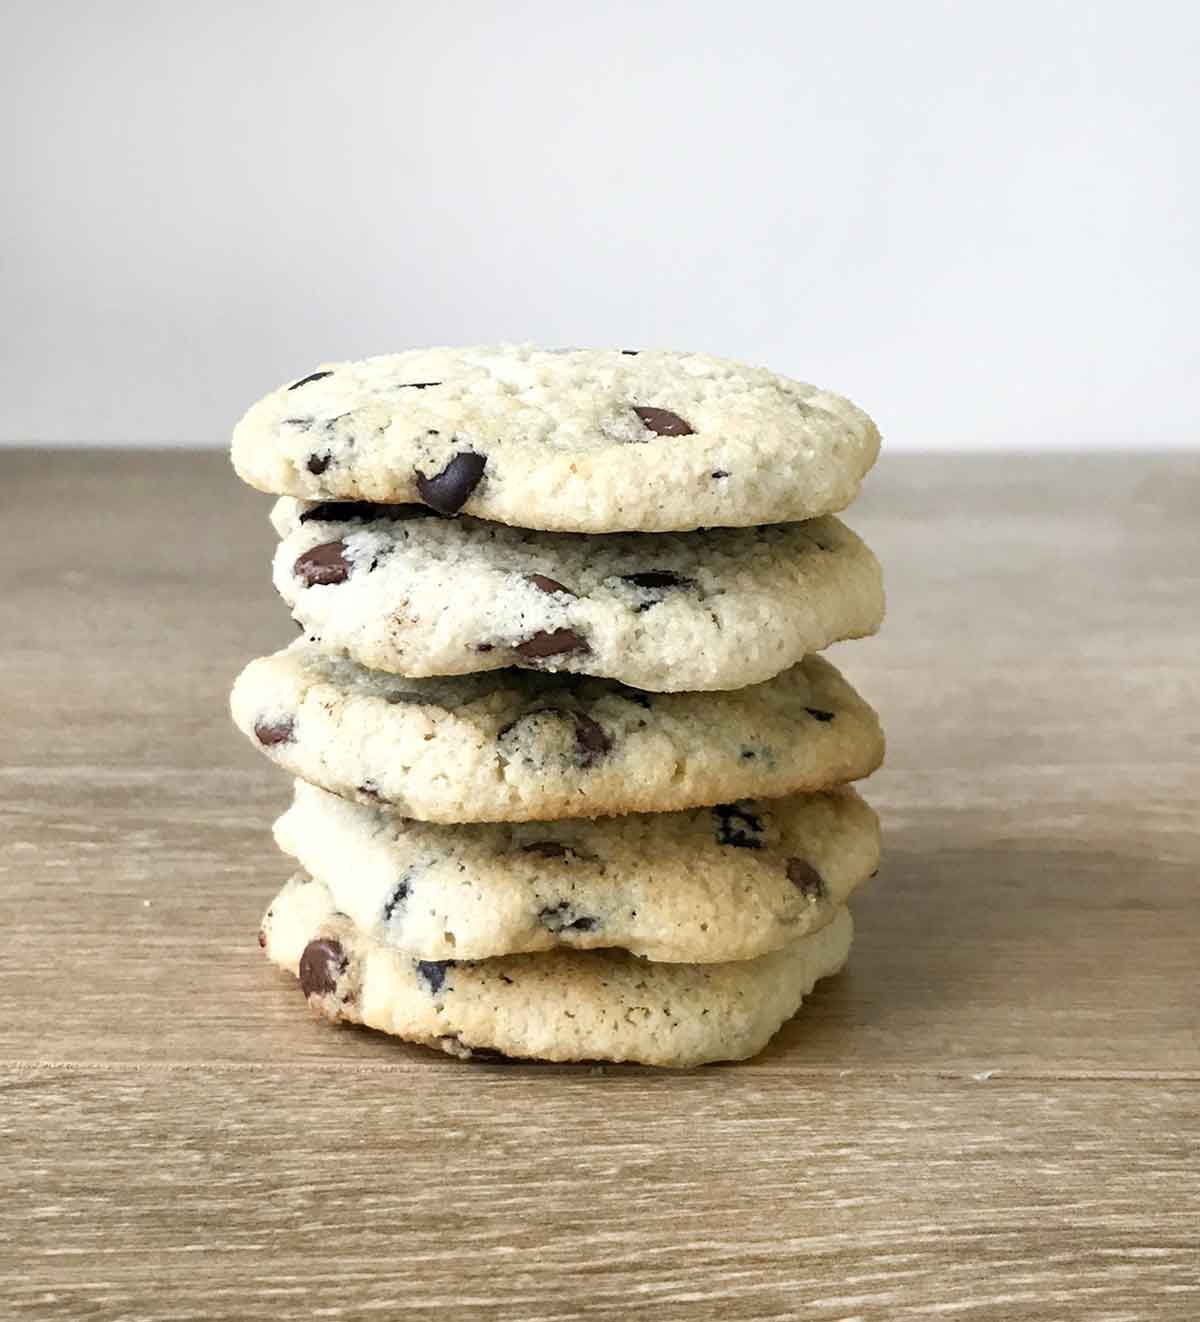 Best keto chocolate chip cookies on top of each others.